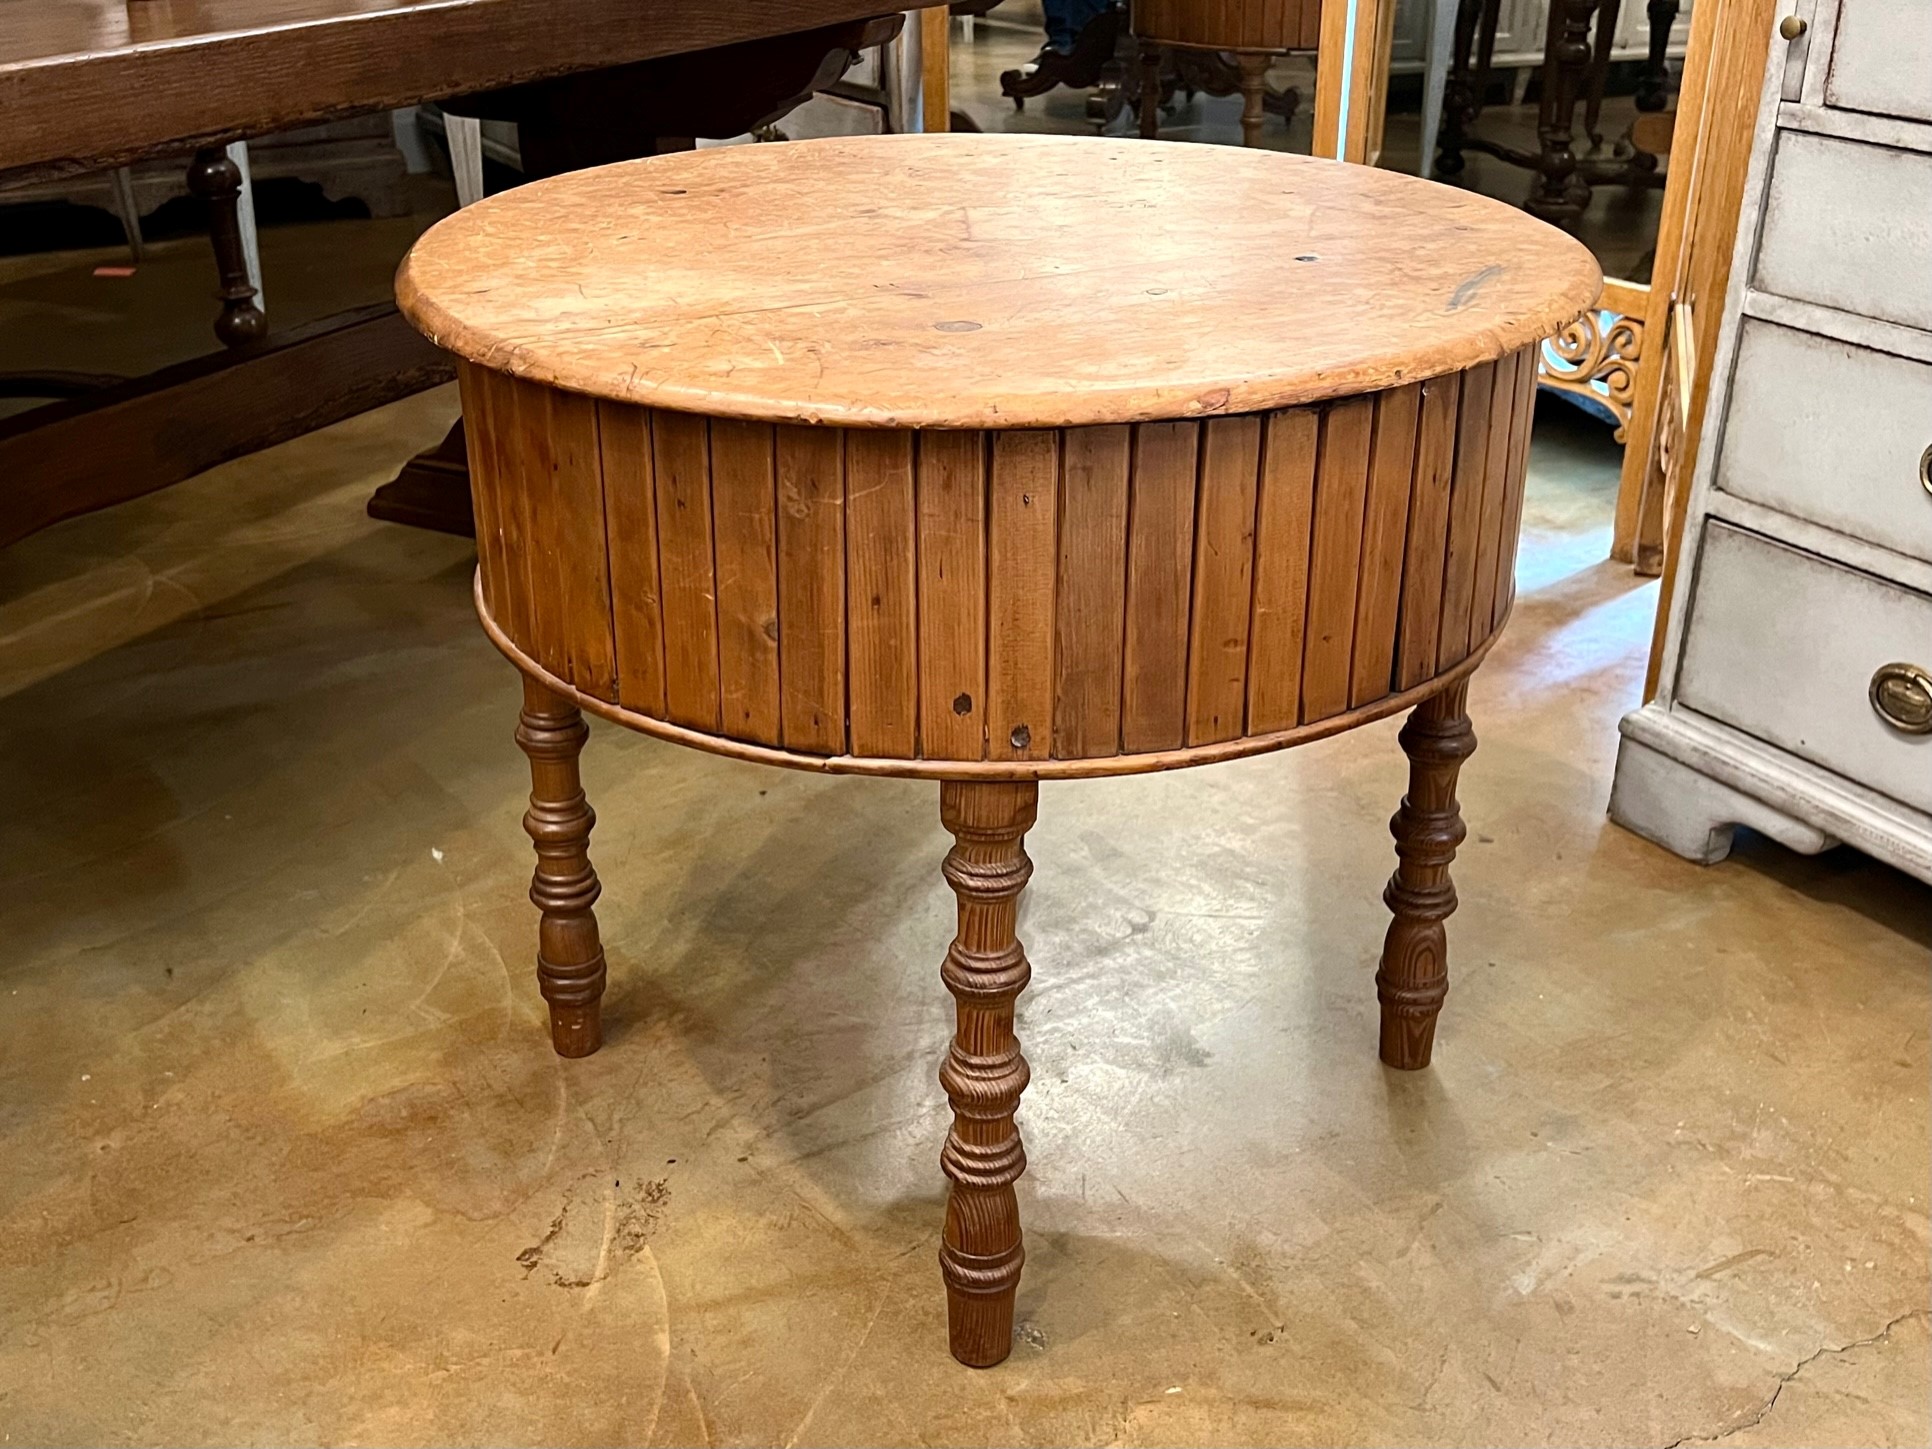 19th Century English Pine Round Drum Table - Removable Top With Metal Basin Inside